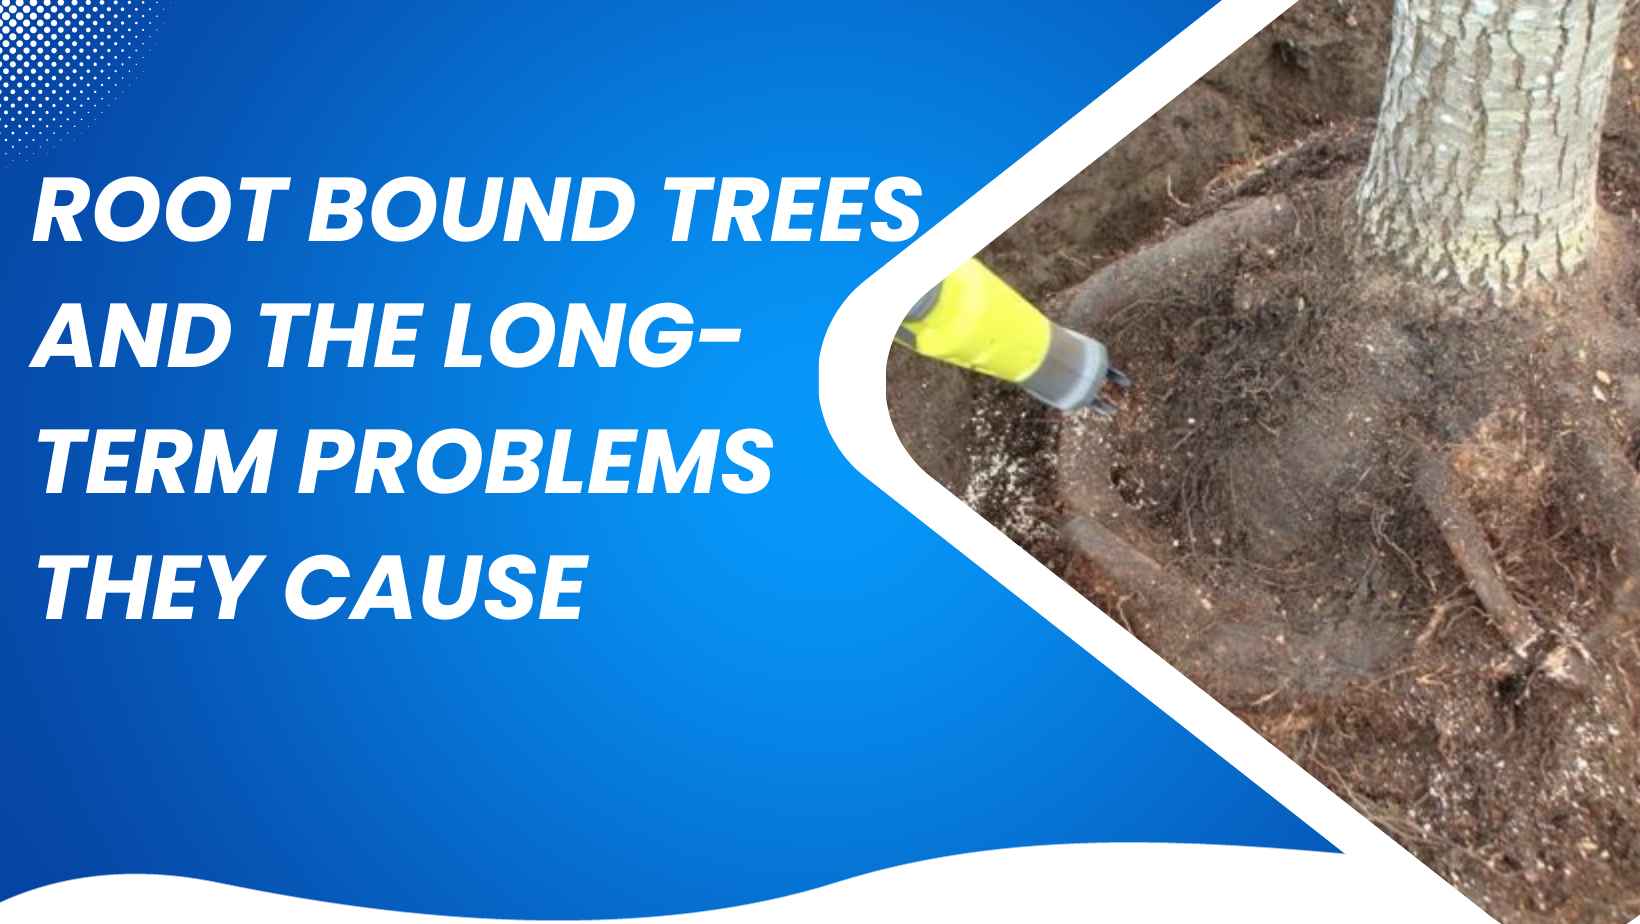 Root Bound Trees and The Long-Term Problems They Cause